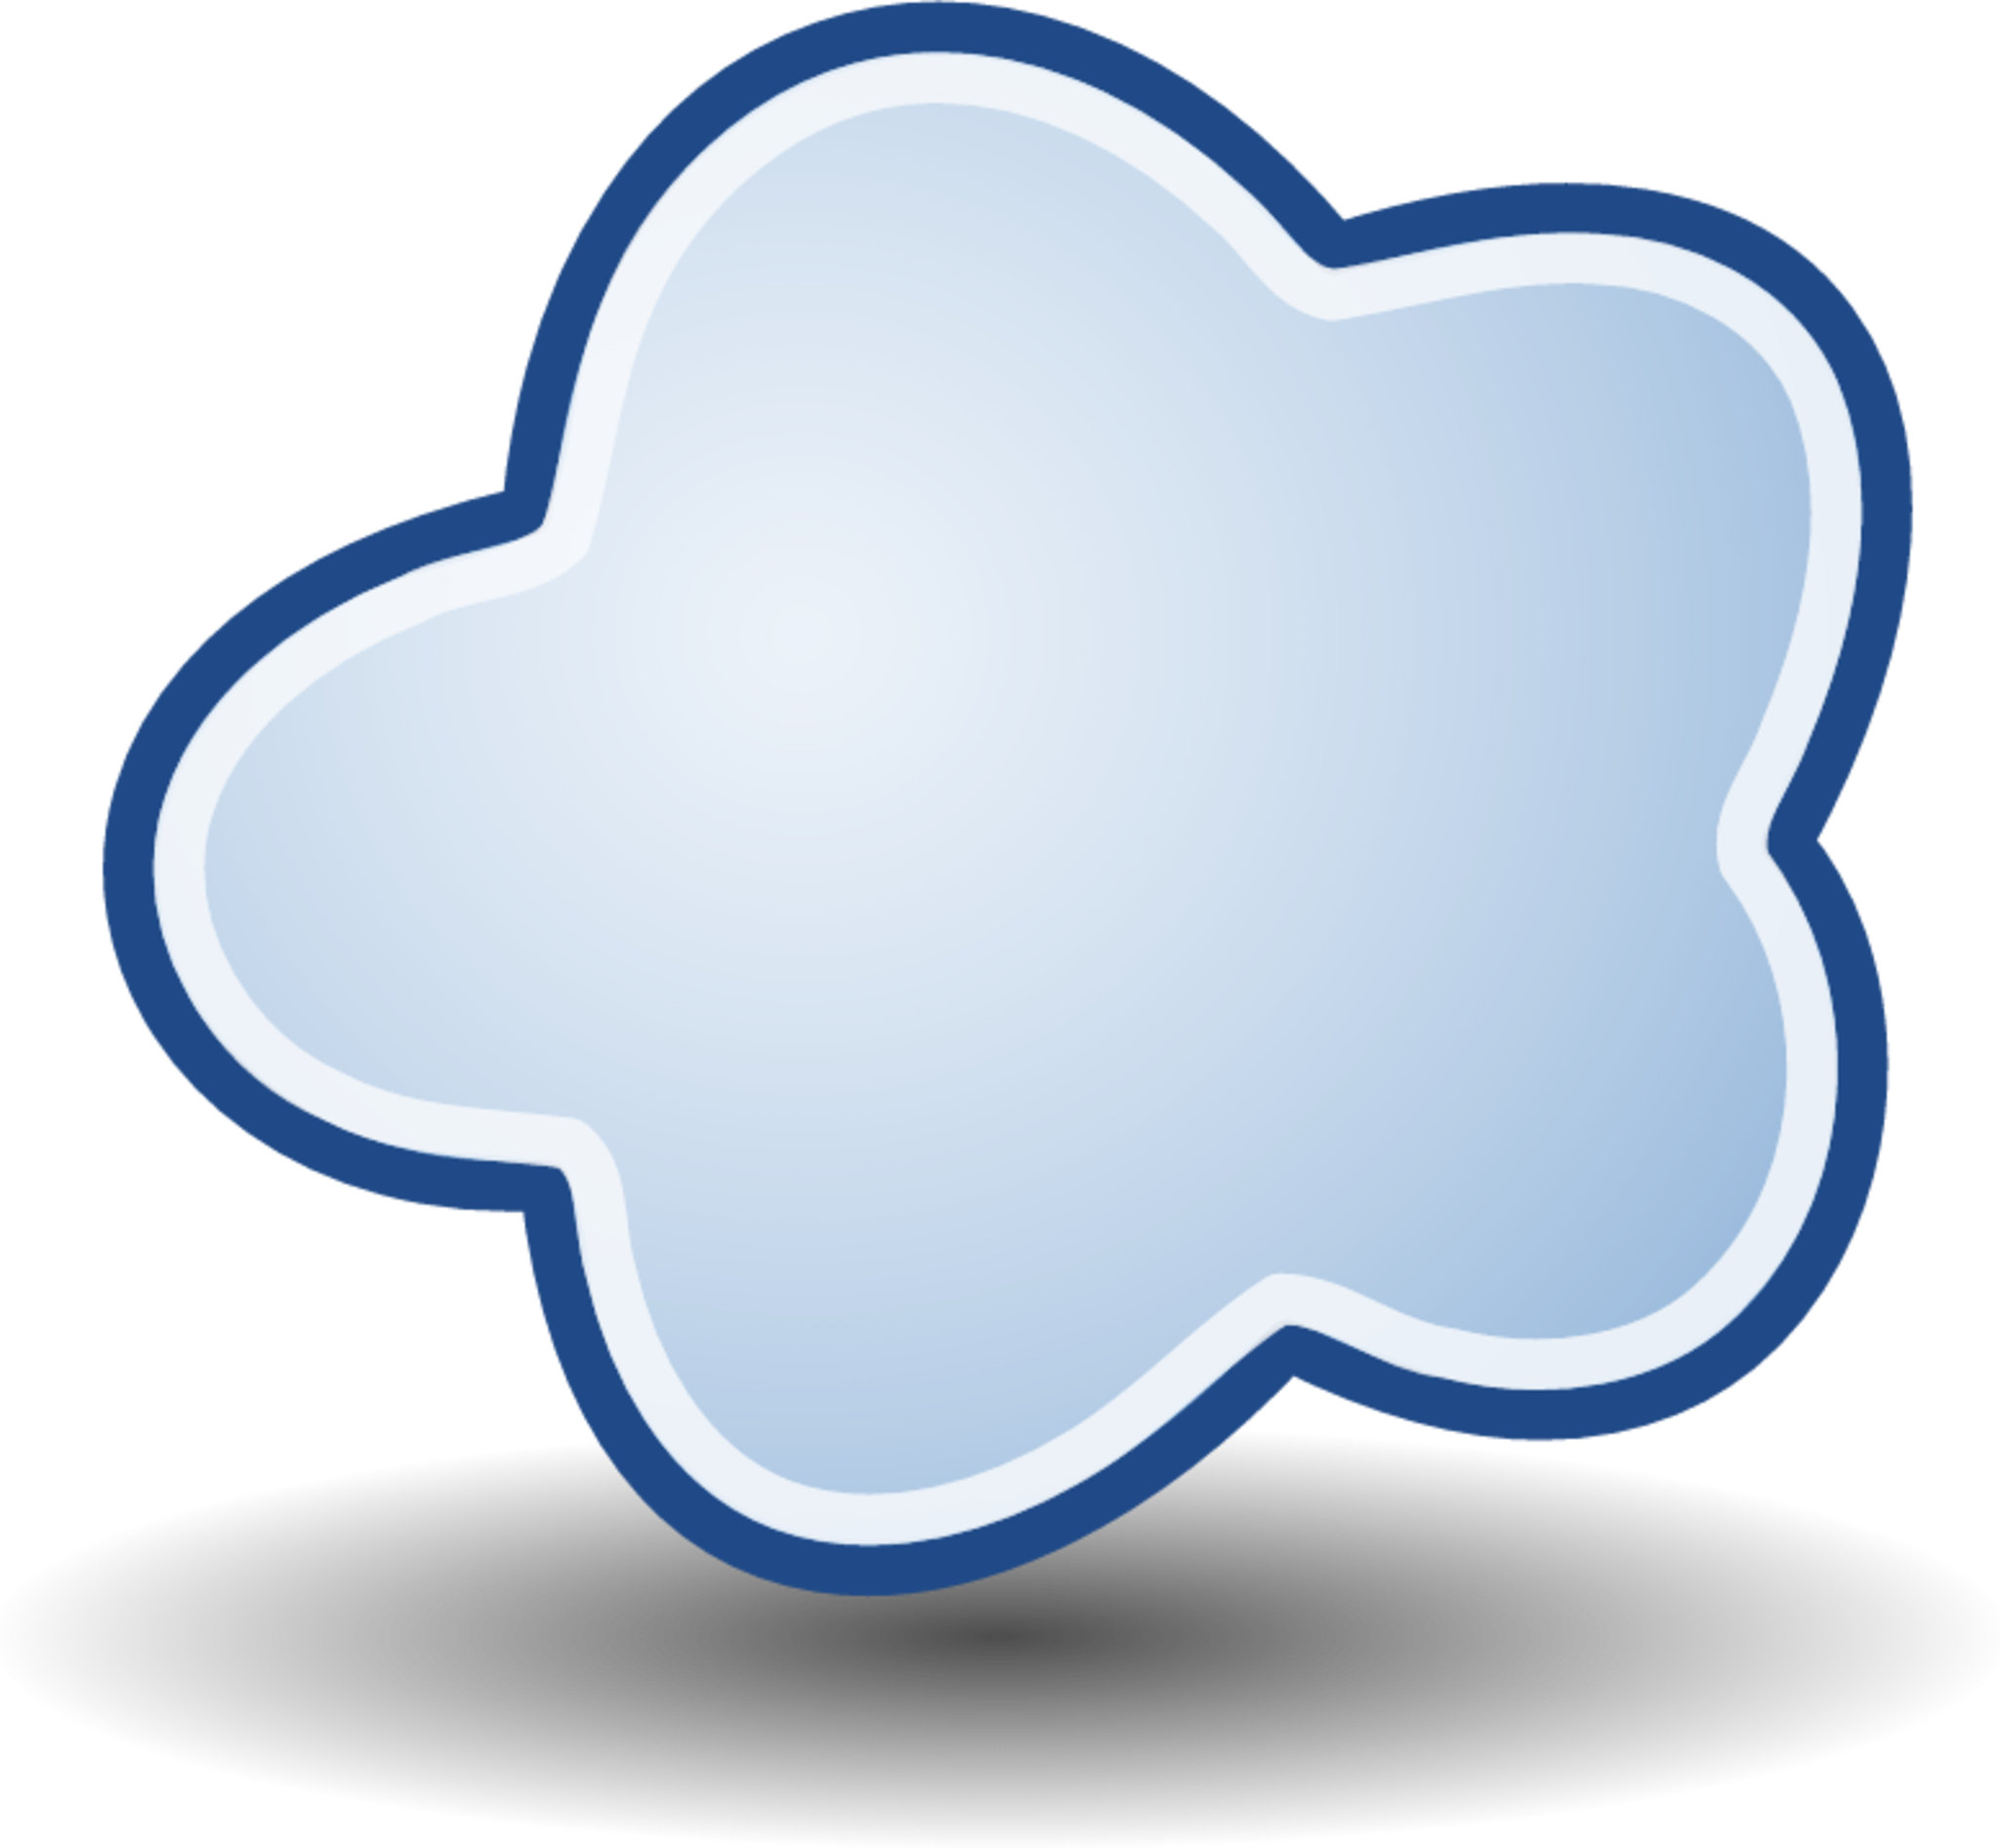 network cloud icon png